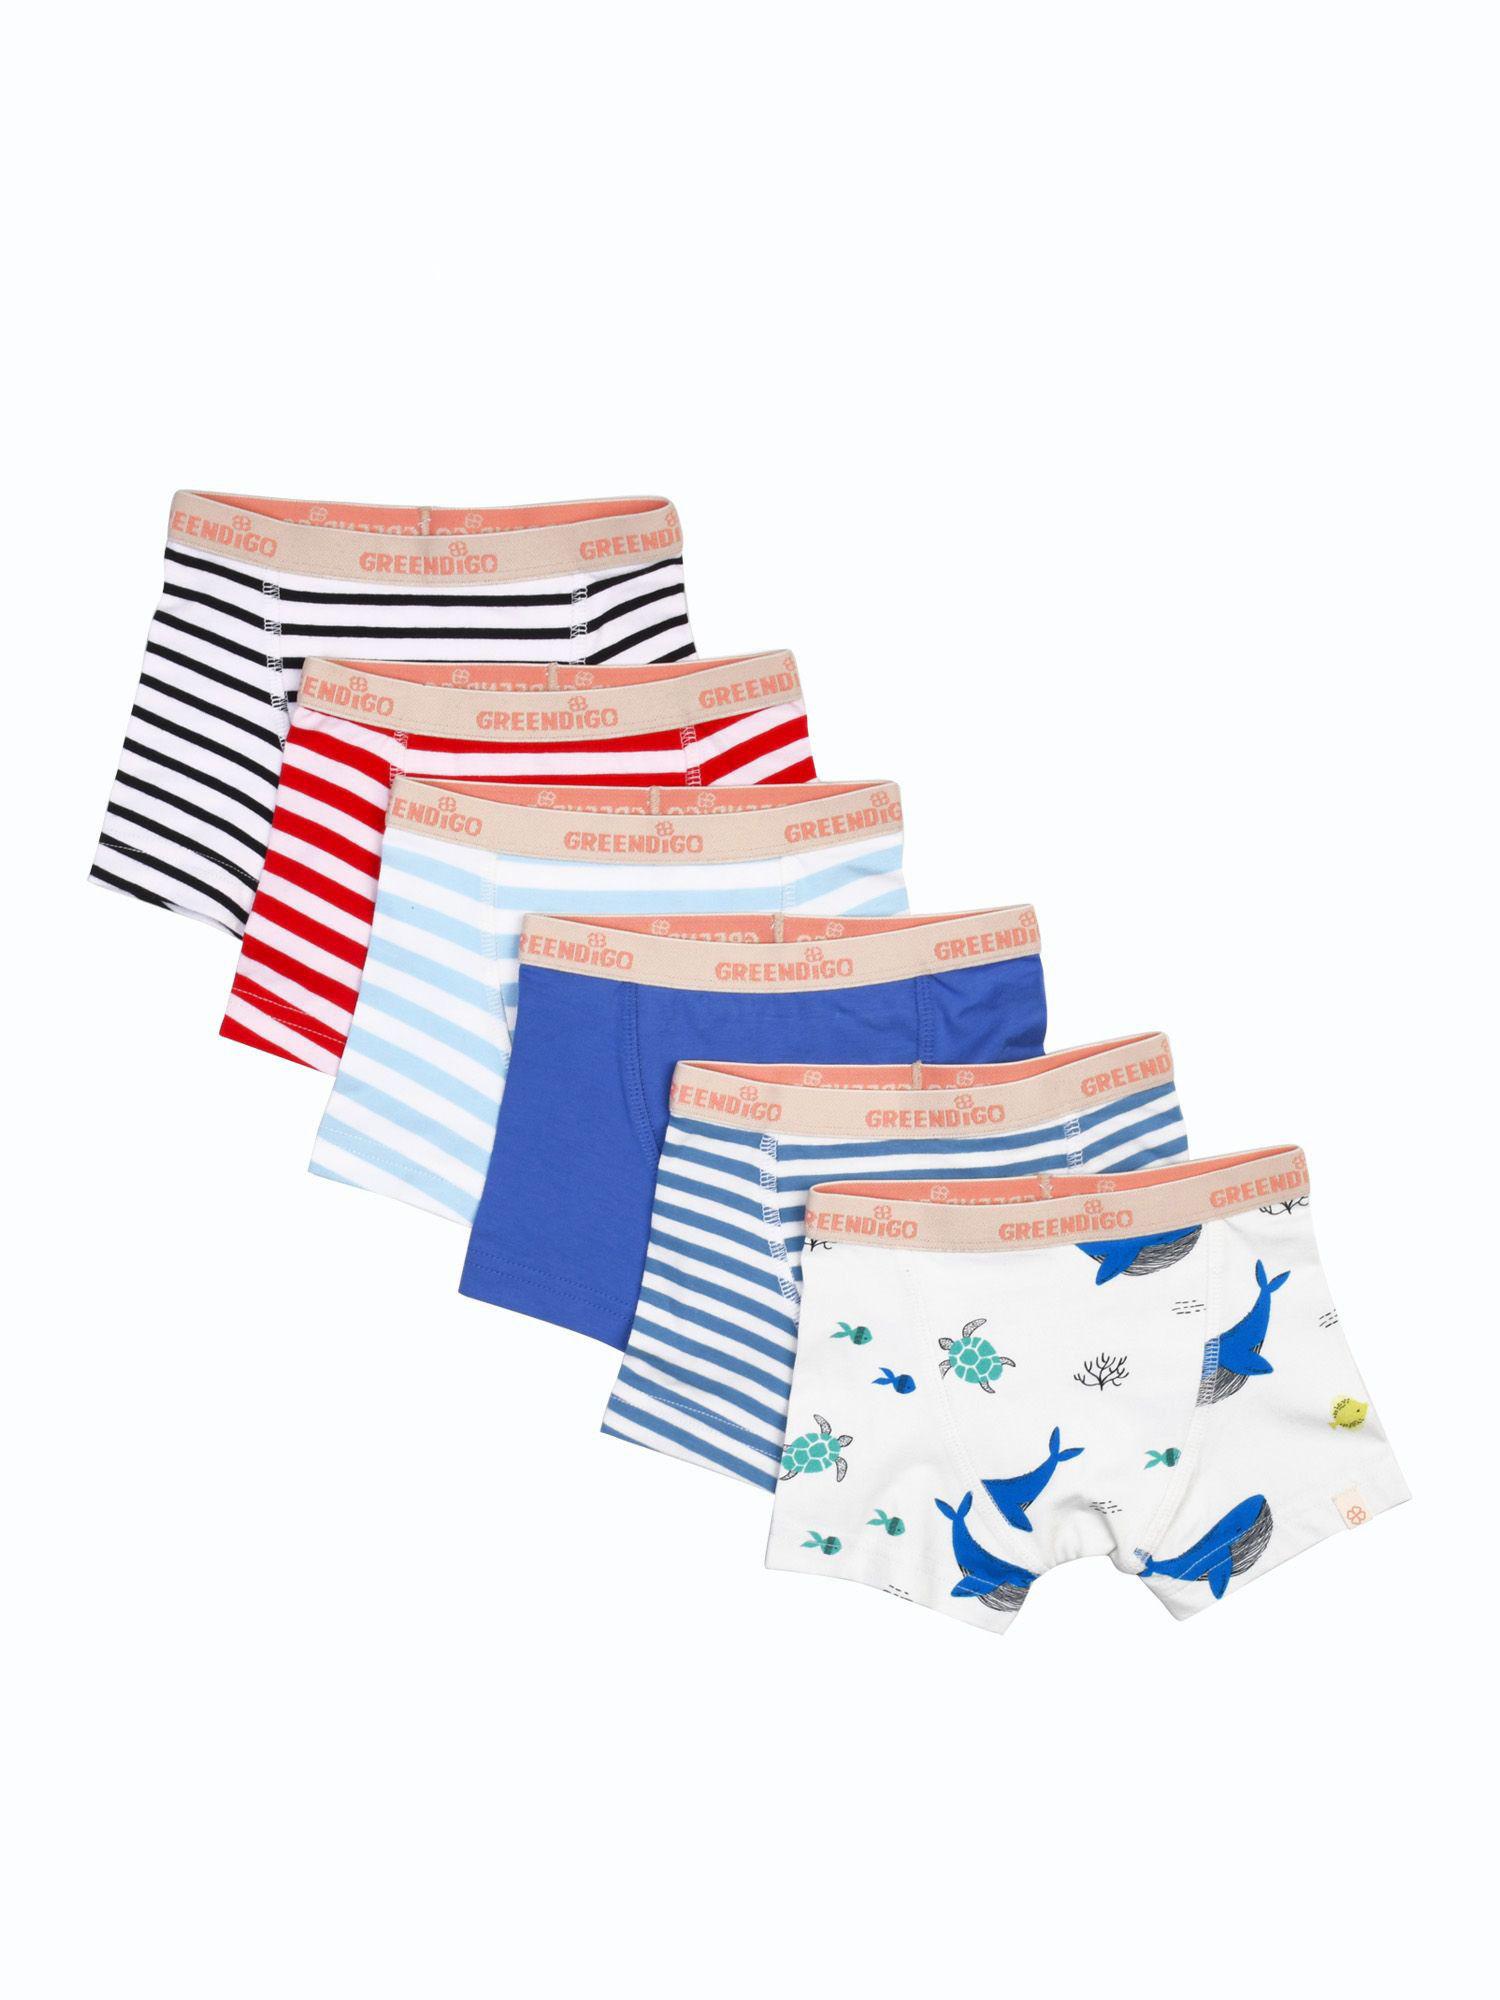 organic cotton boys printed briefs (pack of 6)